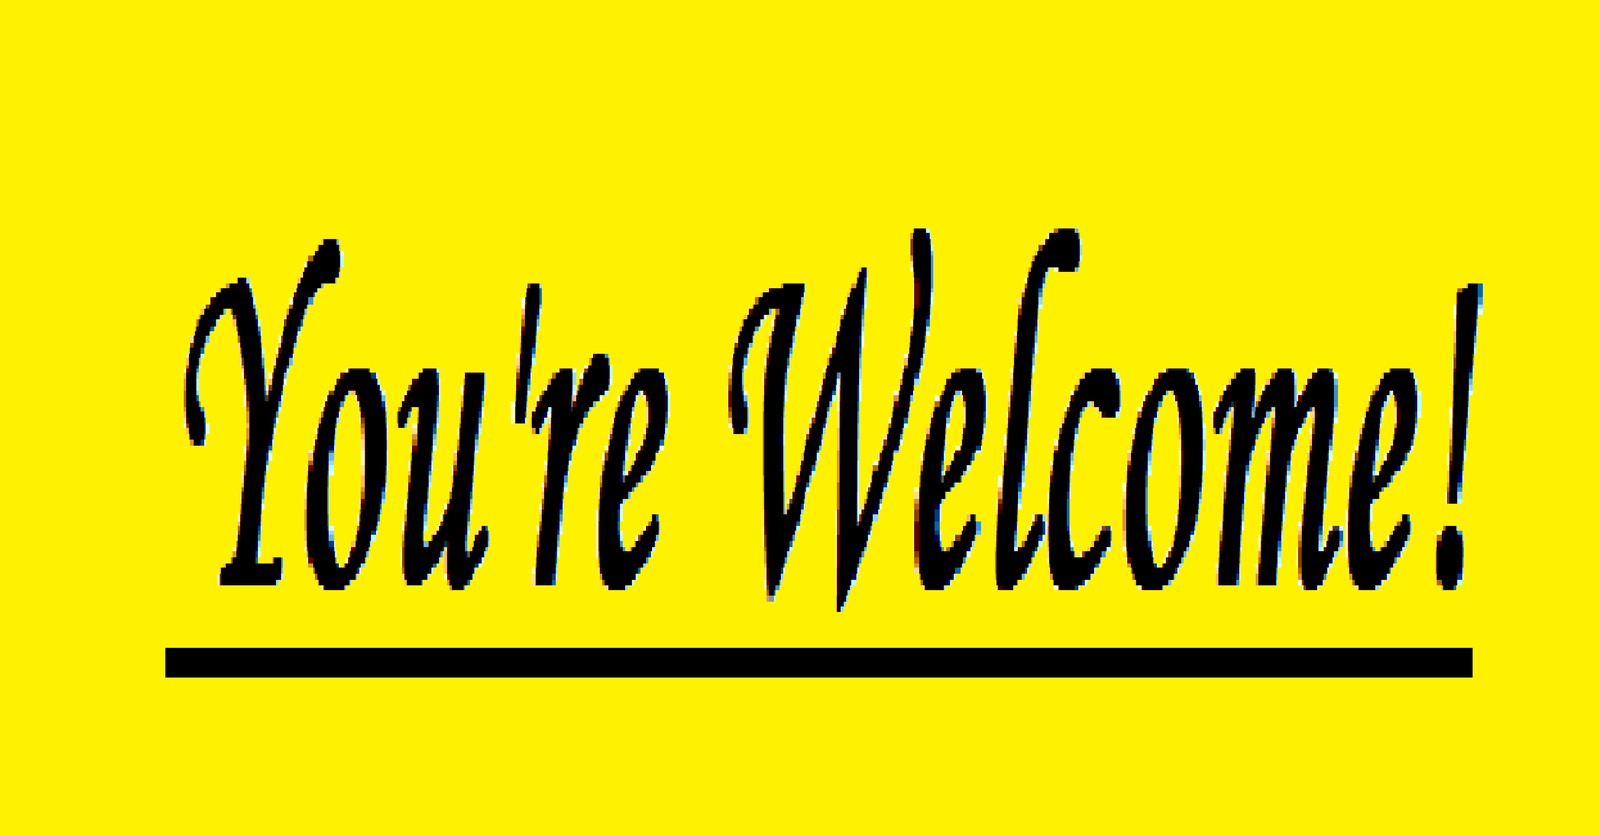 Png Youre Welcome - . Hdpng.com Youu0027Re Welcome! By Ask Rachel Fox, Transparent background PNG HD thumbnail